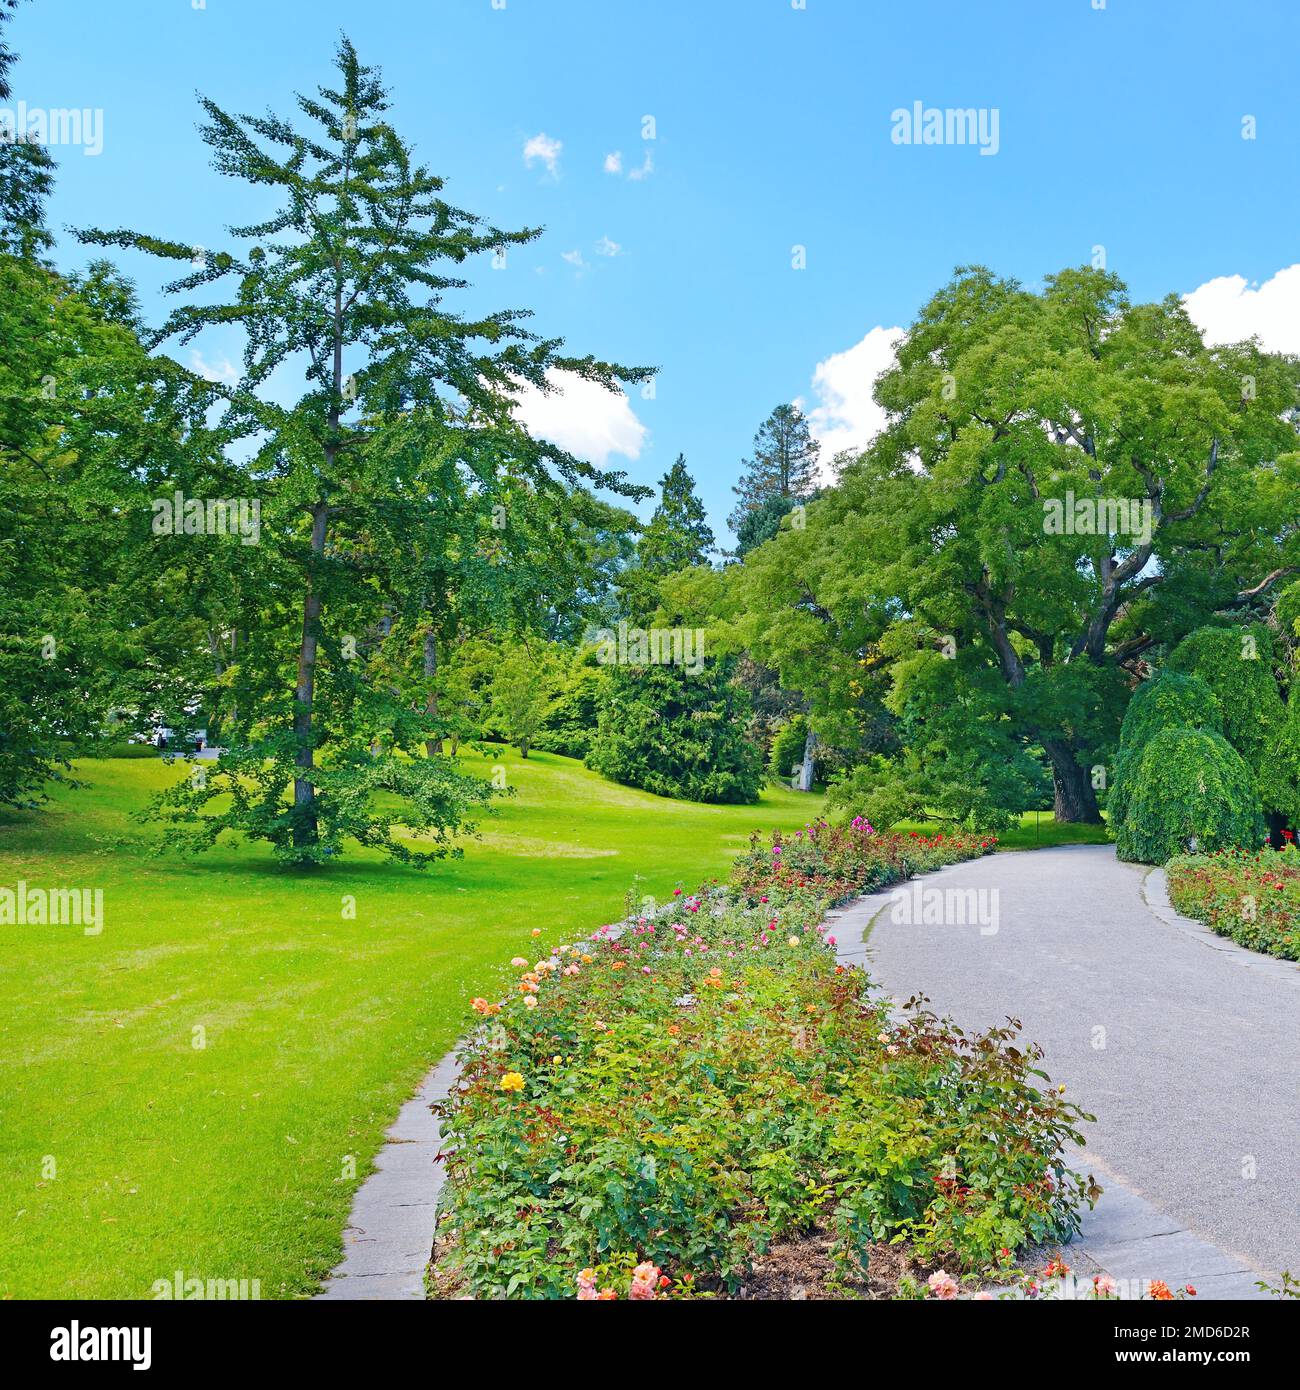 Footpath in a summer park Stock Photo